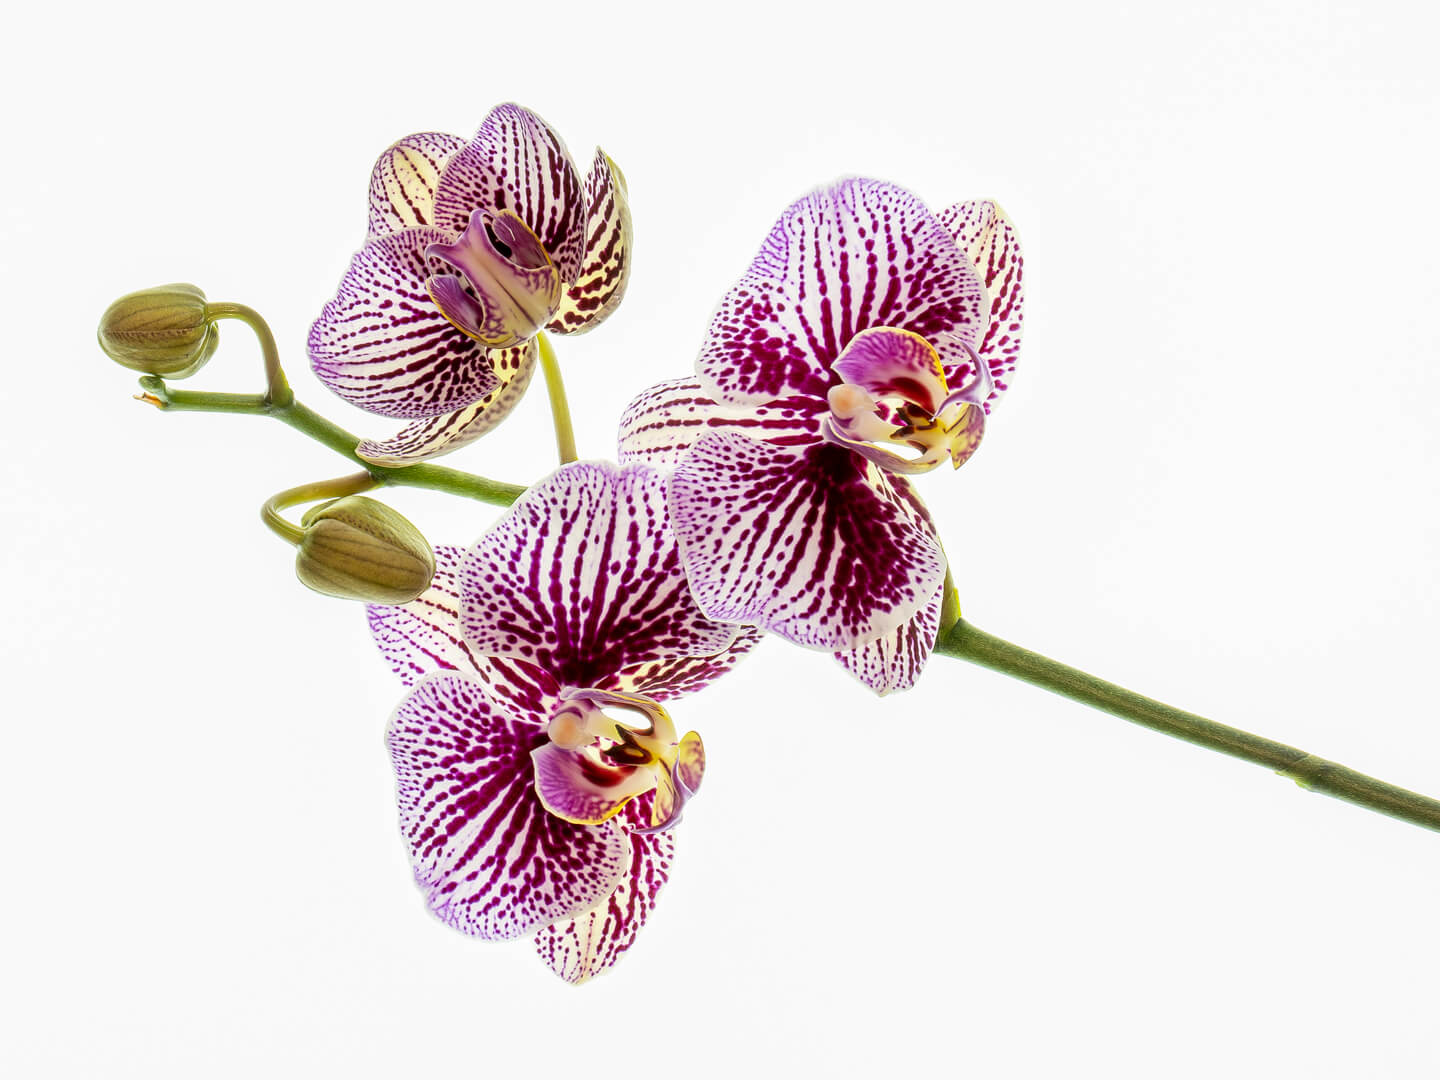 Honour For Digital Exotic Orchid By Rose Parr